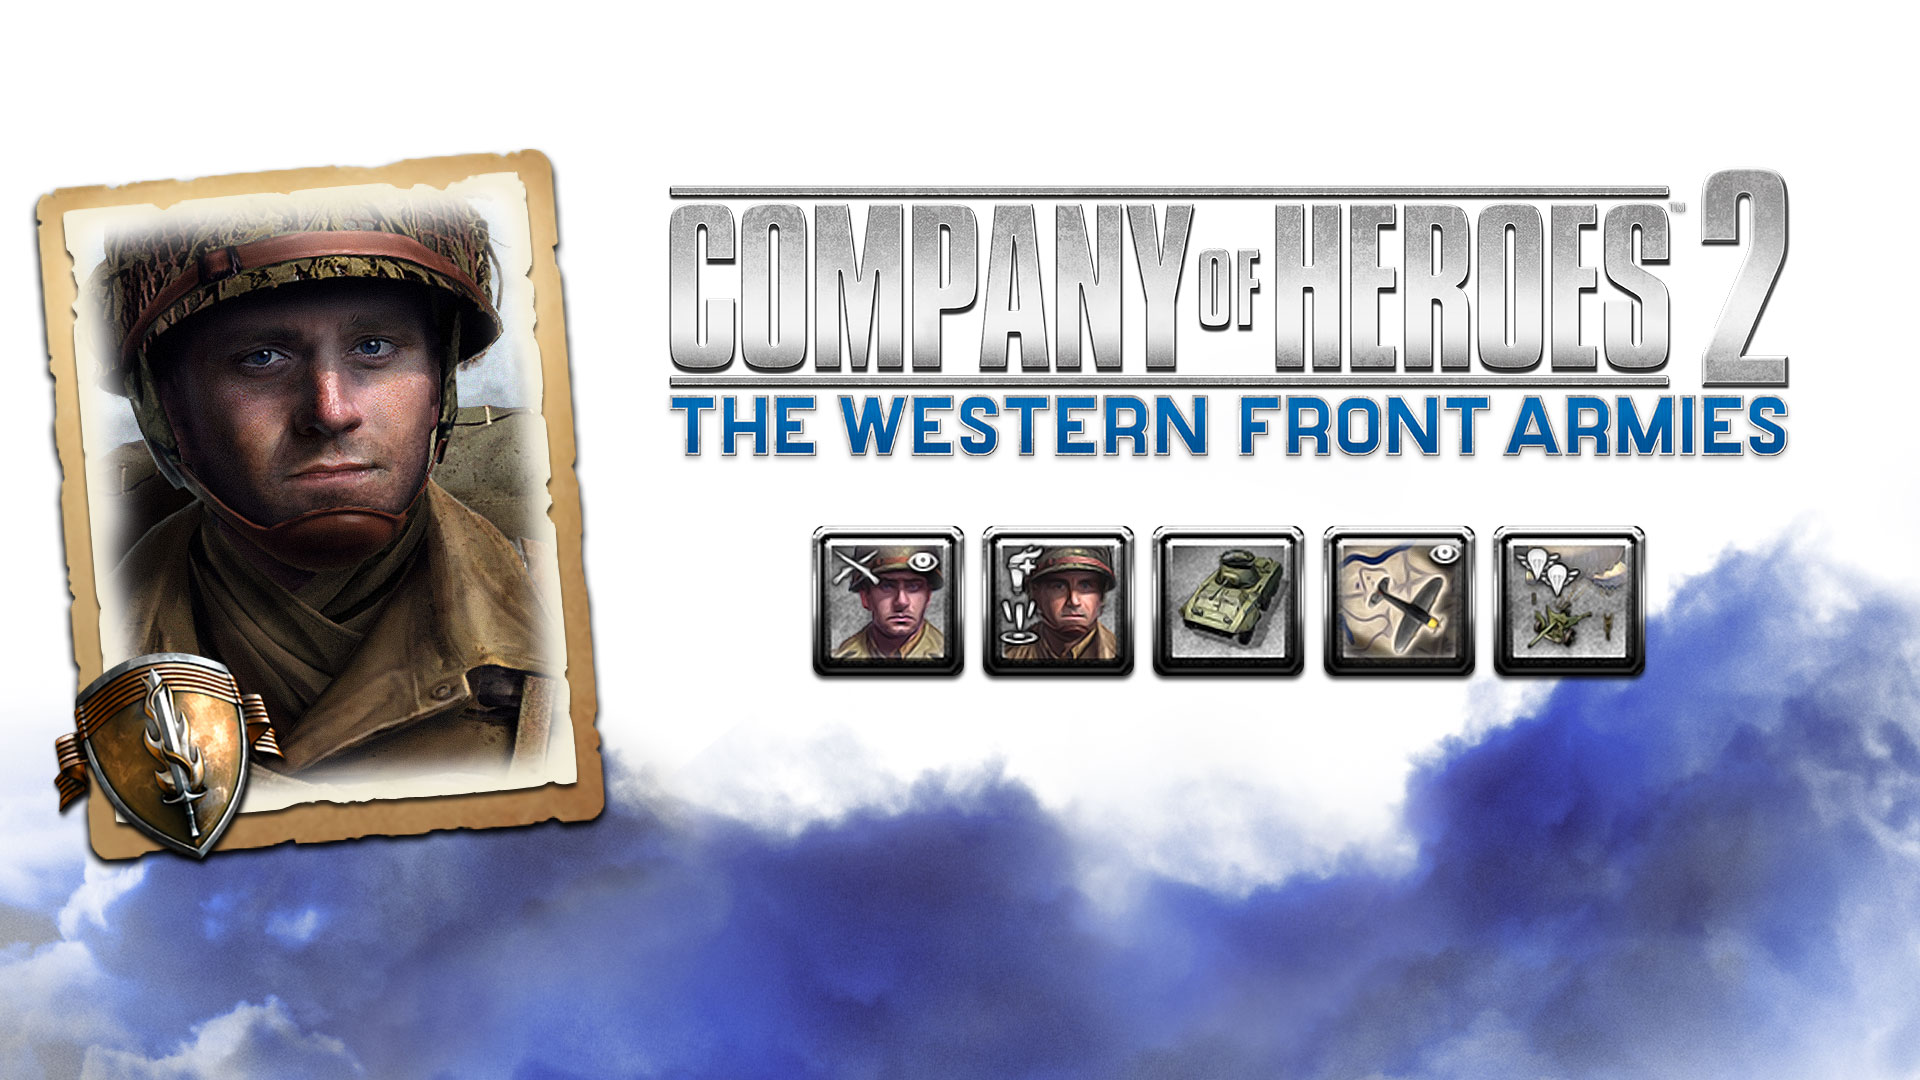 Company of Heroes 2 - US Forces Commander: Recon Support Company DLC Steam CD Key, 10.16 usd